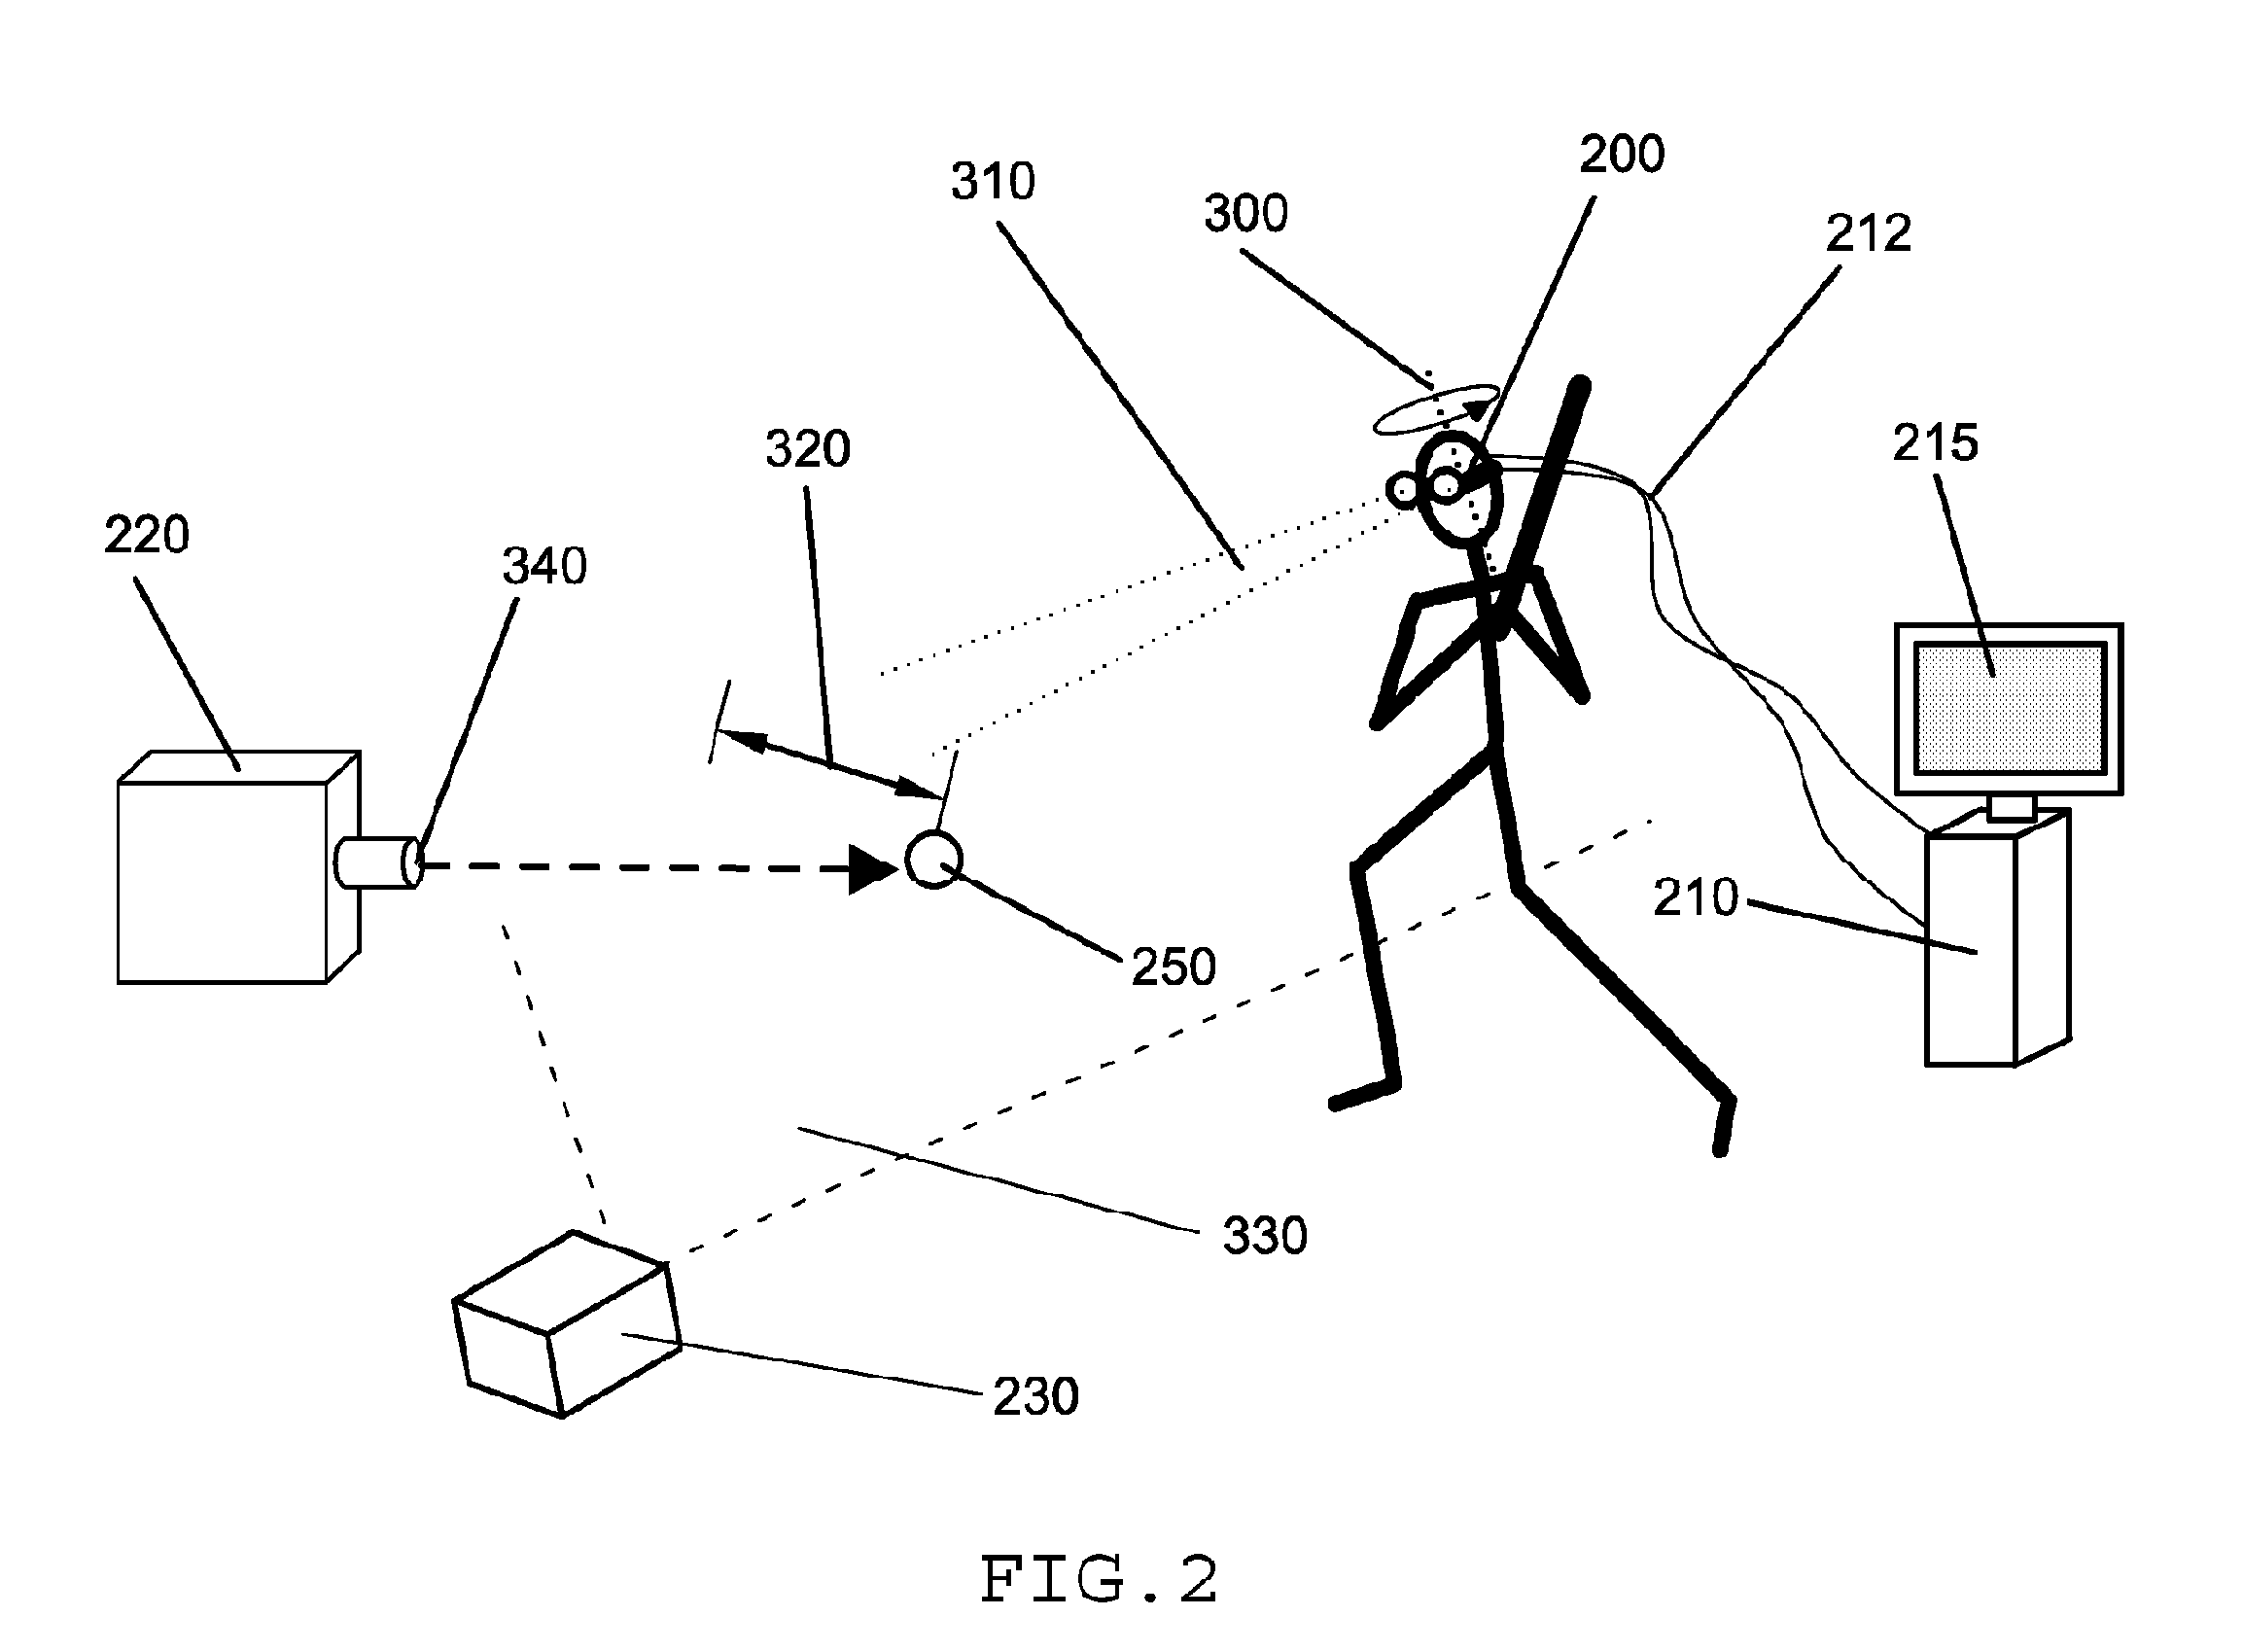 Gaze tracking measurement and training system and method